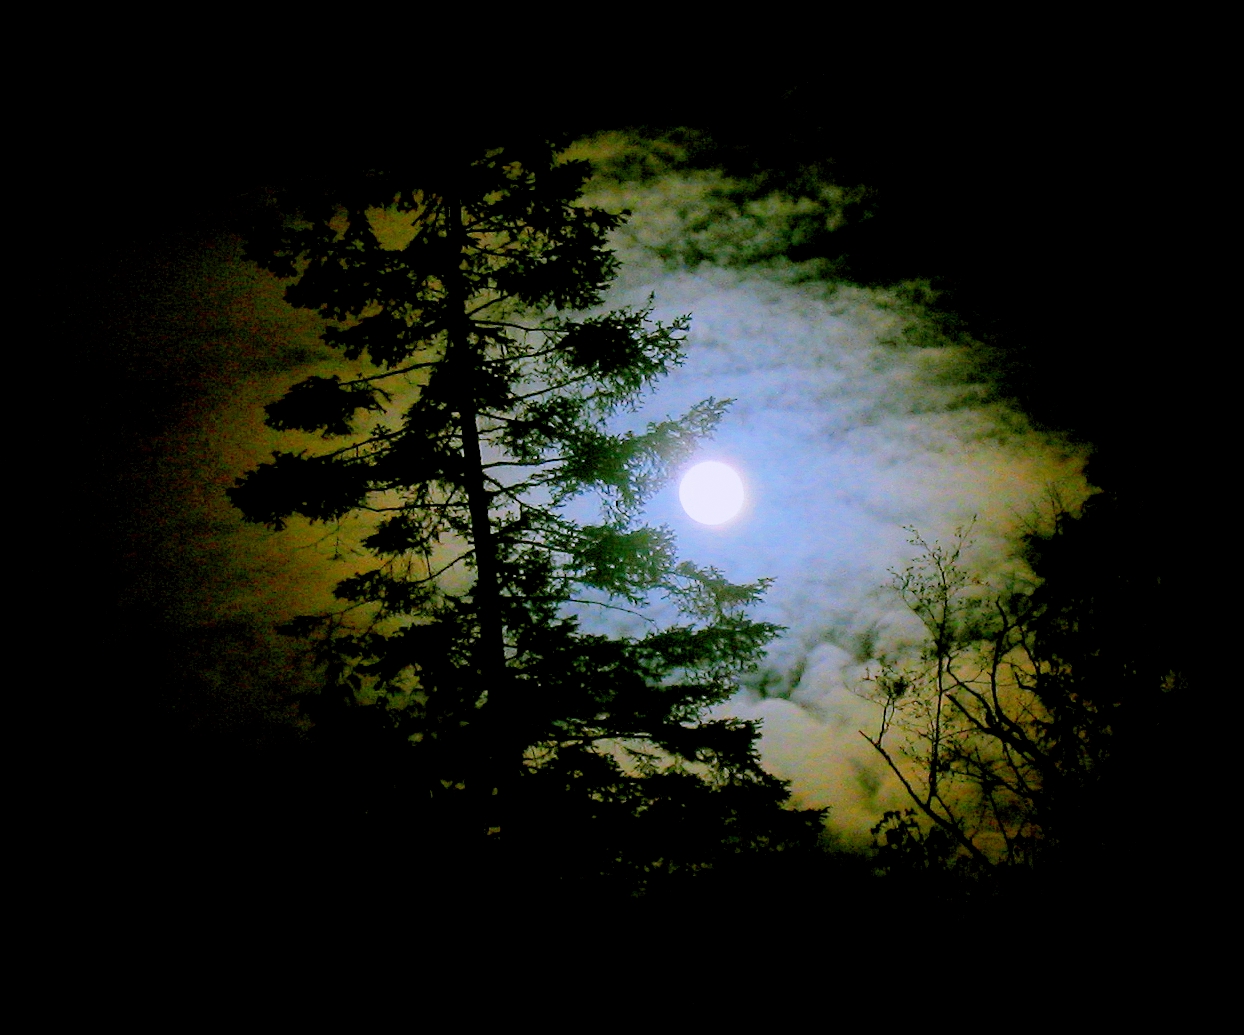 the moon rises above some tree tops and clouds